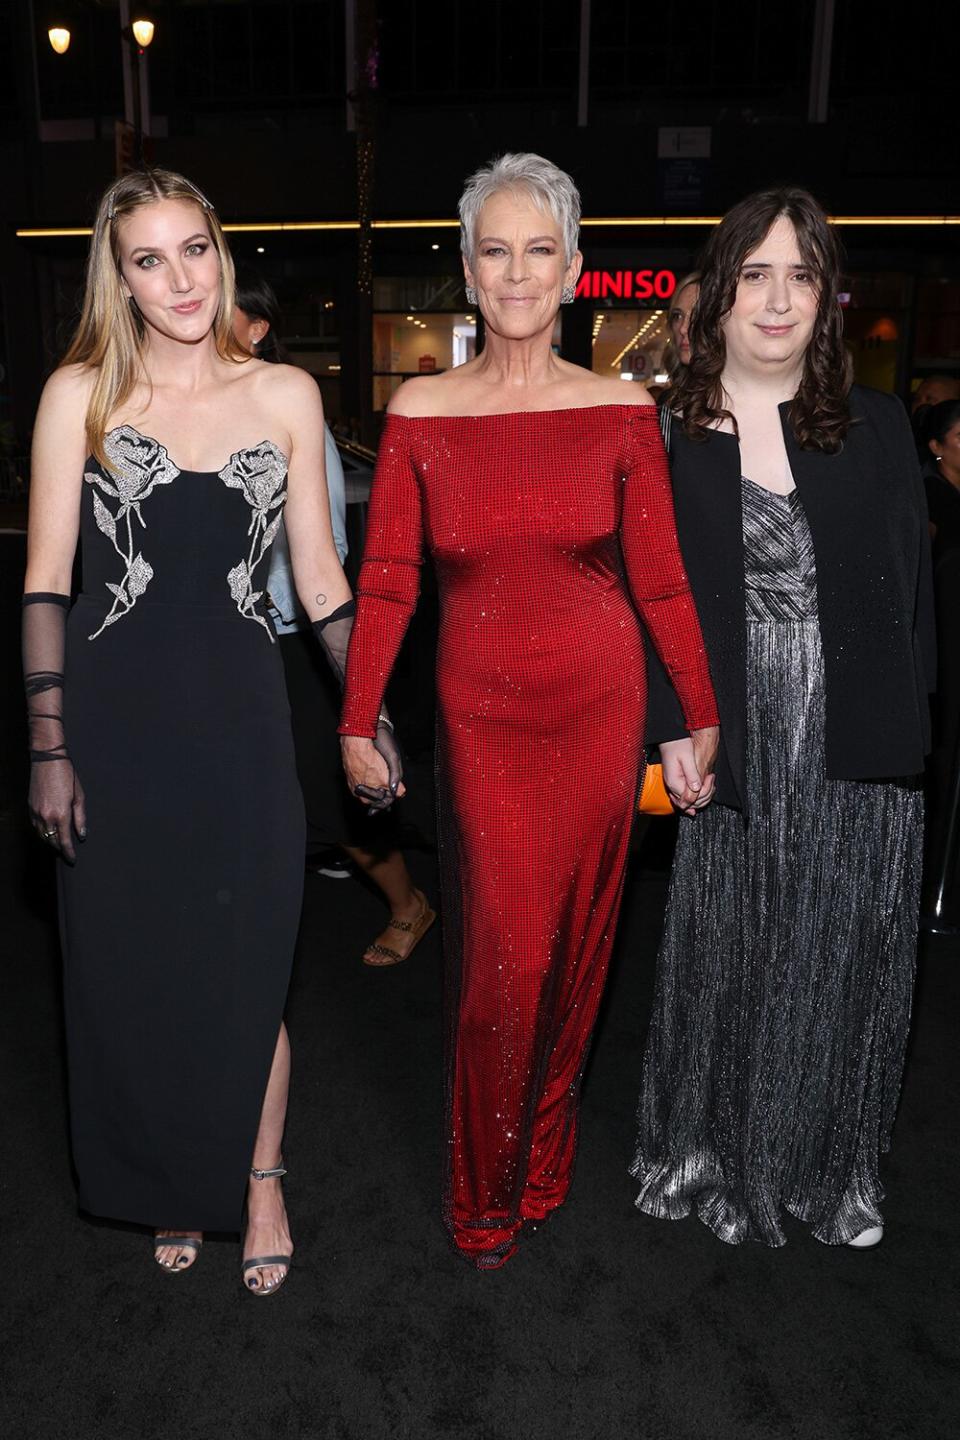 Annie Guest, Jamie Lee Curtis and Ruby Guest at the premiere of "Halloween Ends" held at TCL Chinese Theatre on October 11, 2022 in Los Angeles, California.